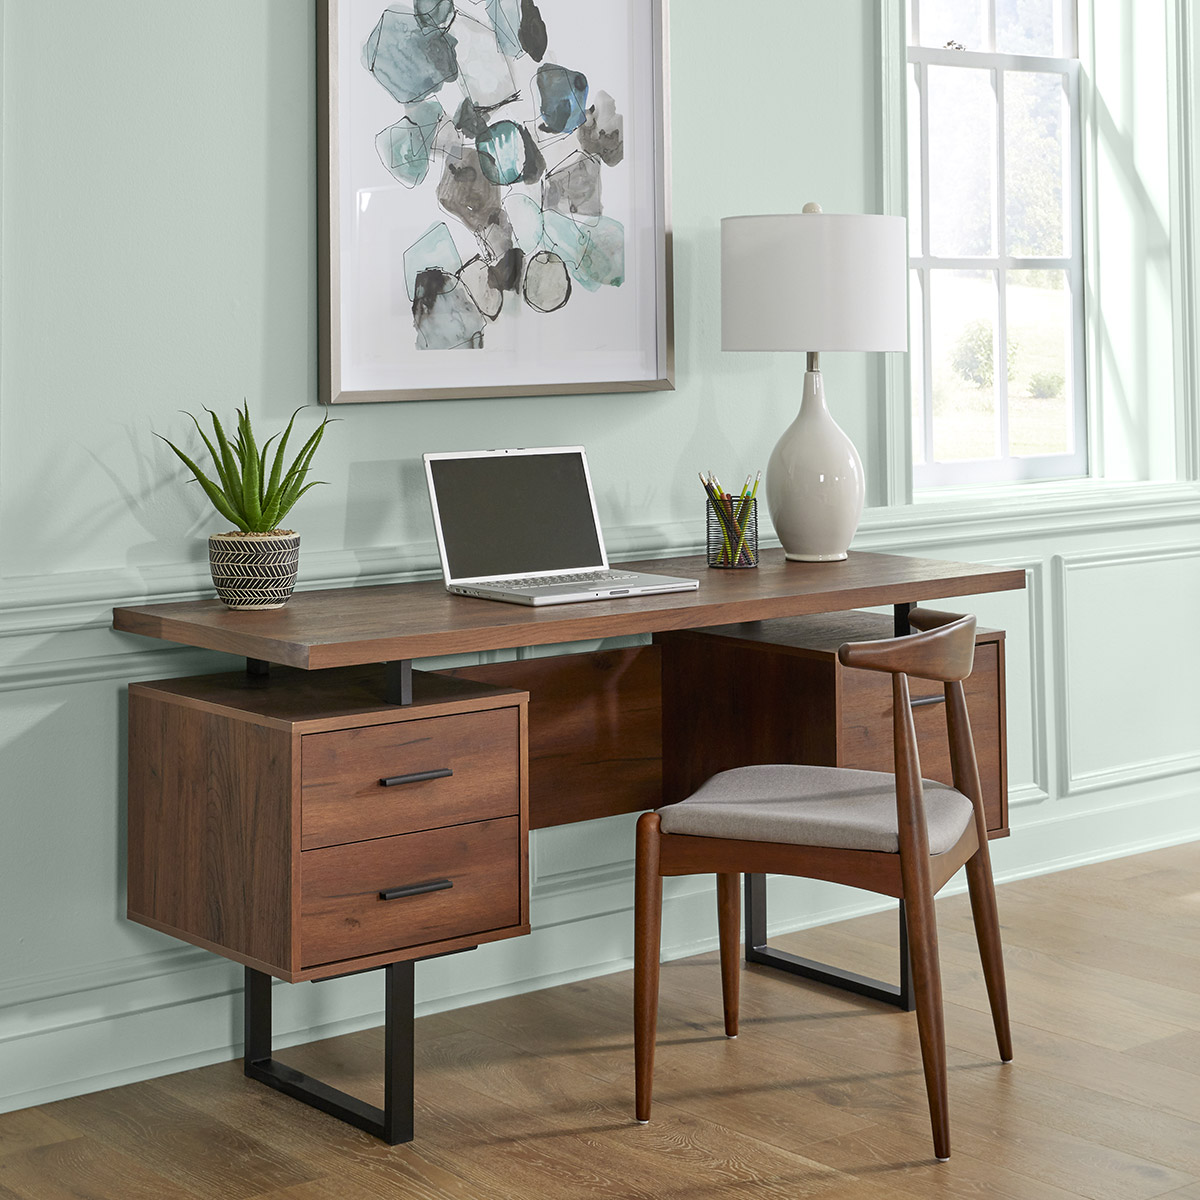 An office space with a wood desk and large piece of art. The walls painted in a soft sea glass green hue.